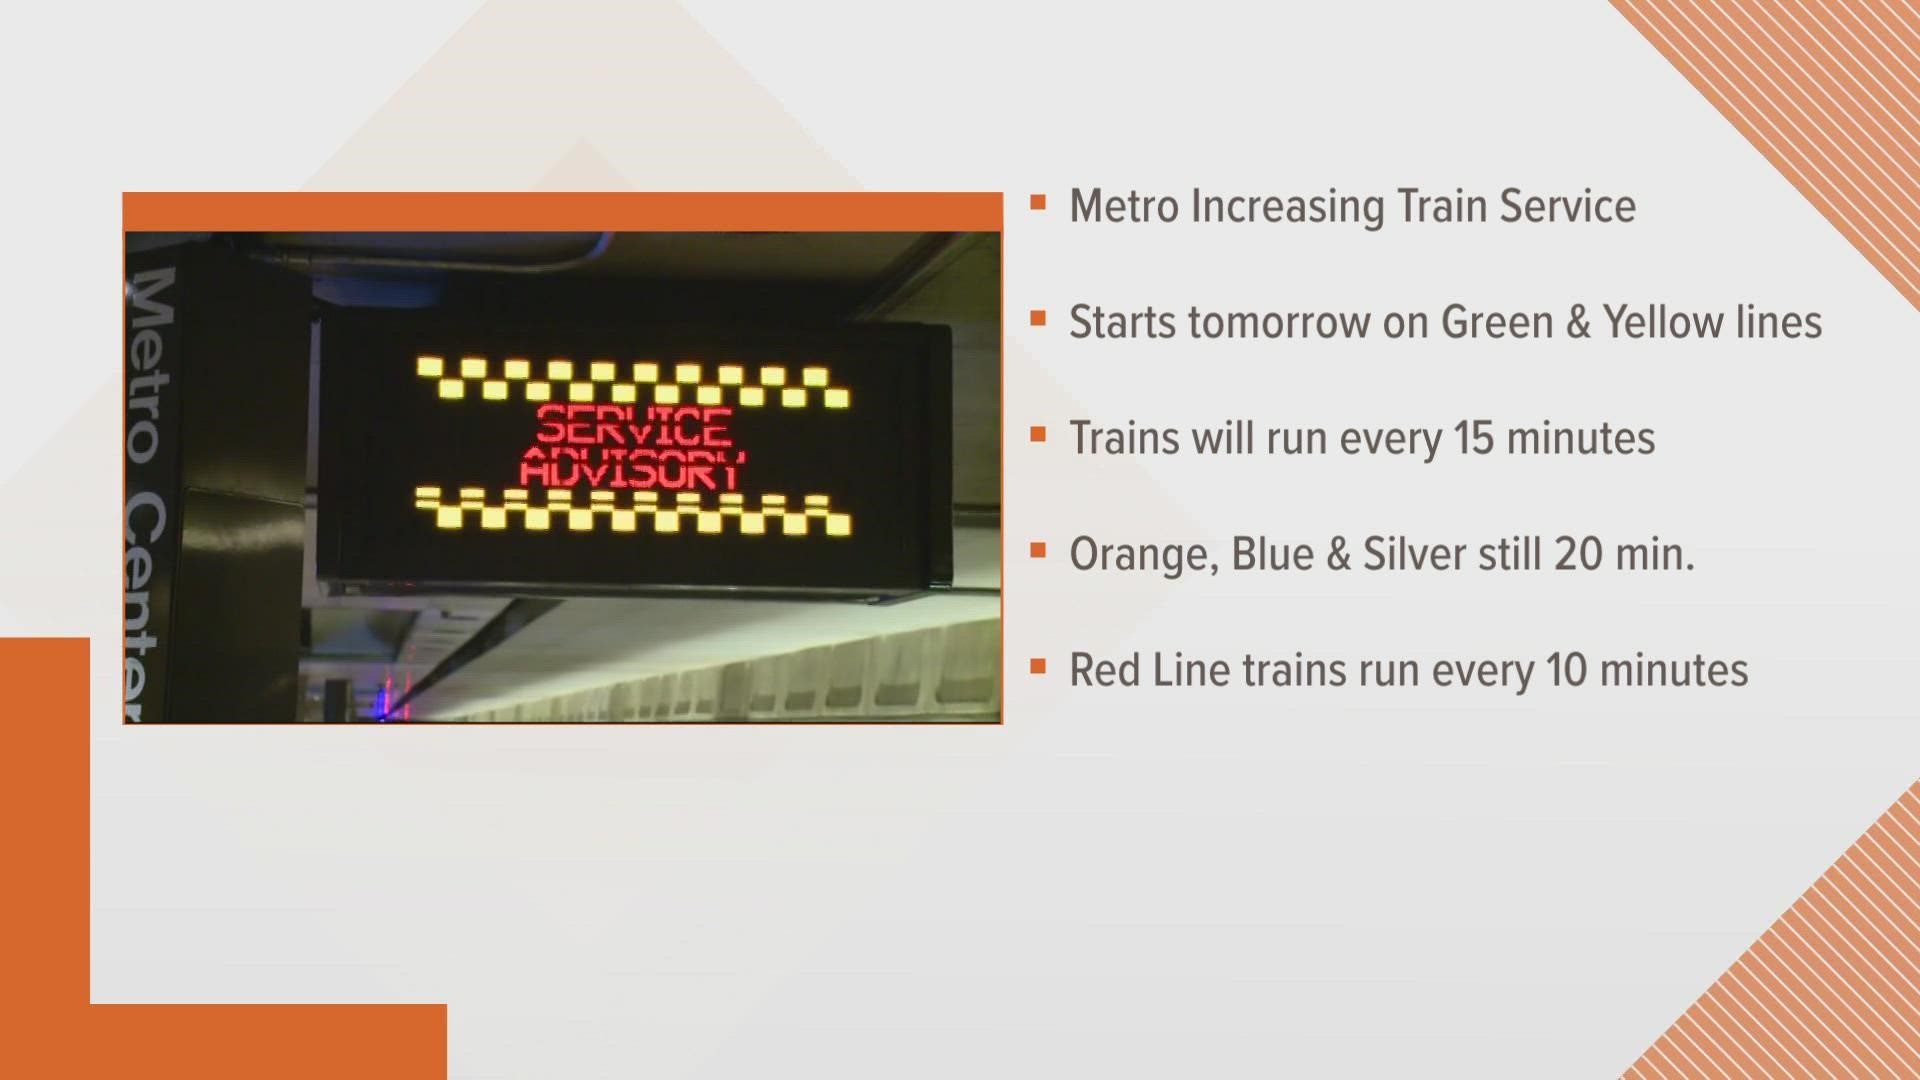 Metro says more trains will be added to the green and yellow lines. A 30 day extension contact has expired, union reps states experienced bus drivers are under paid.